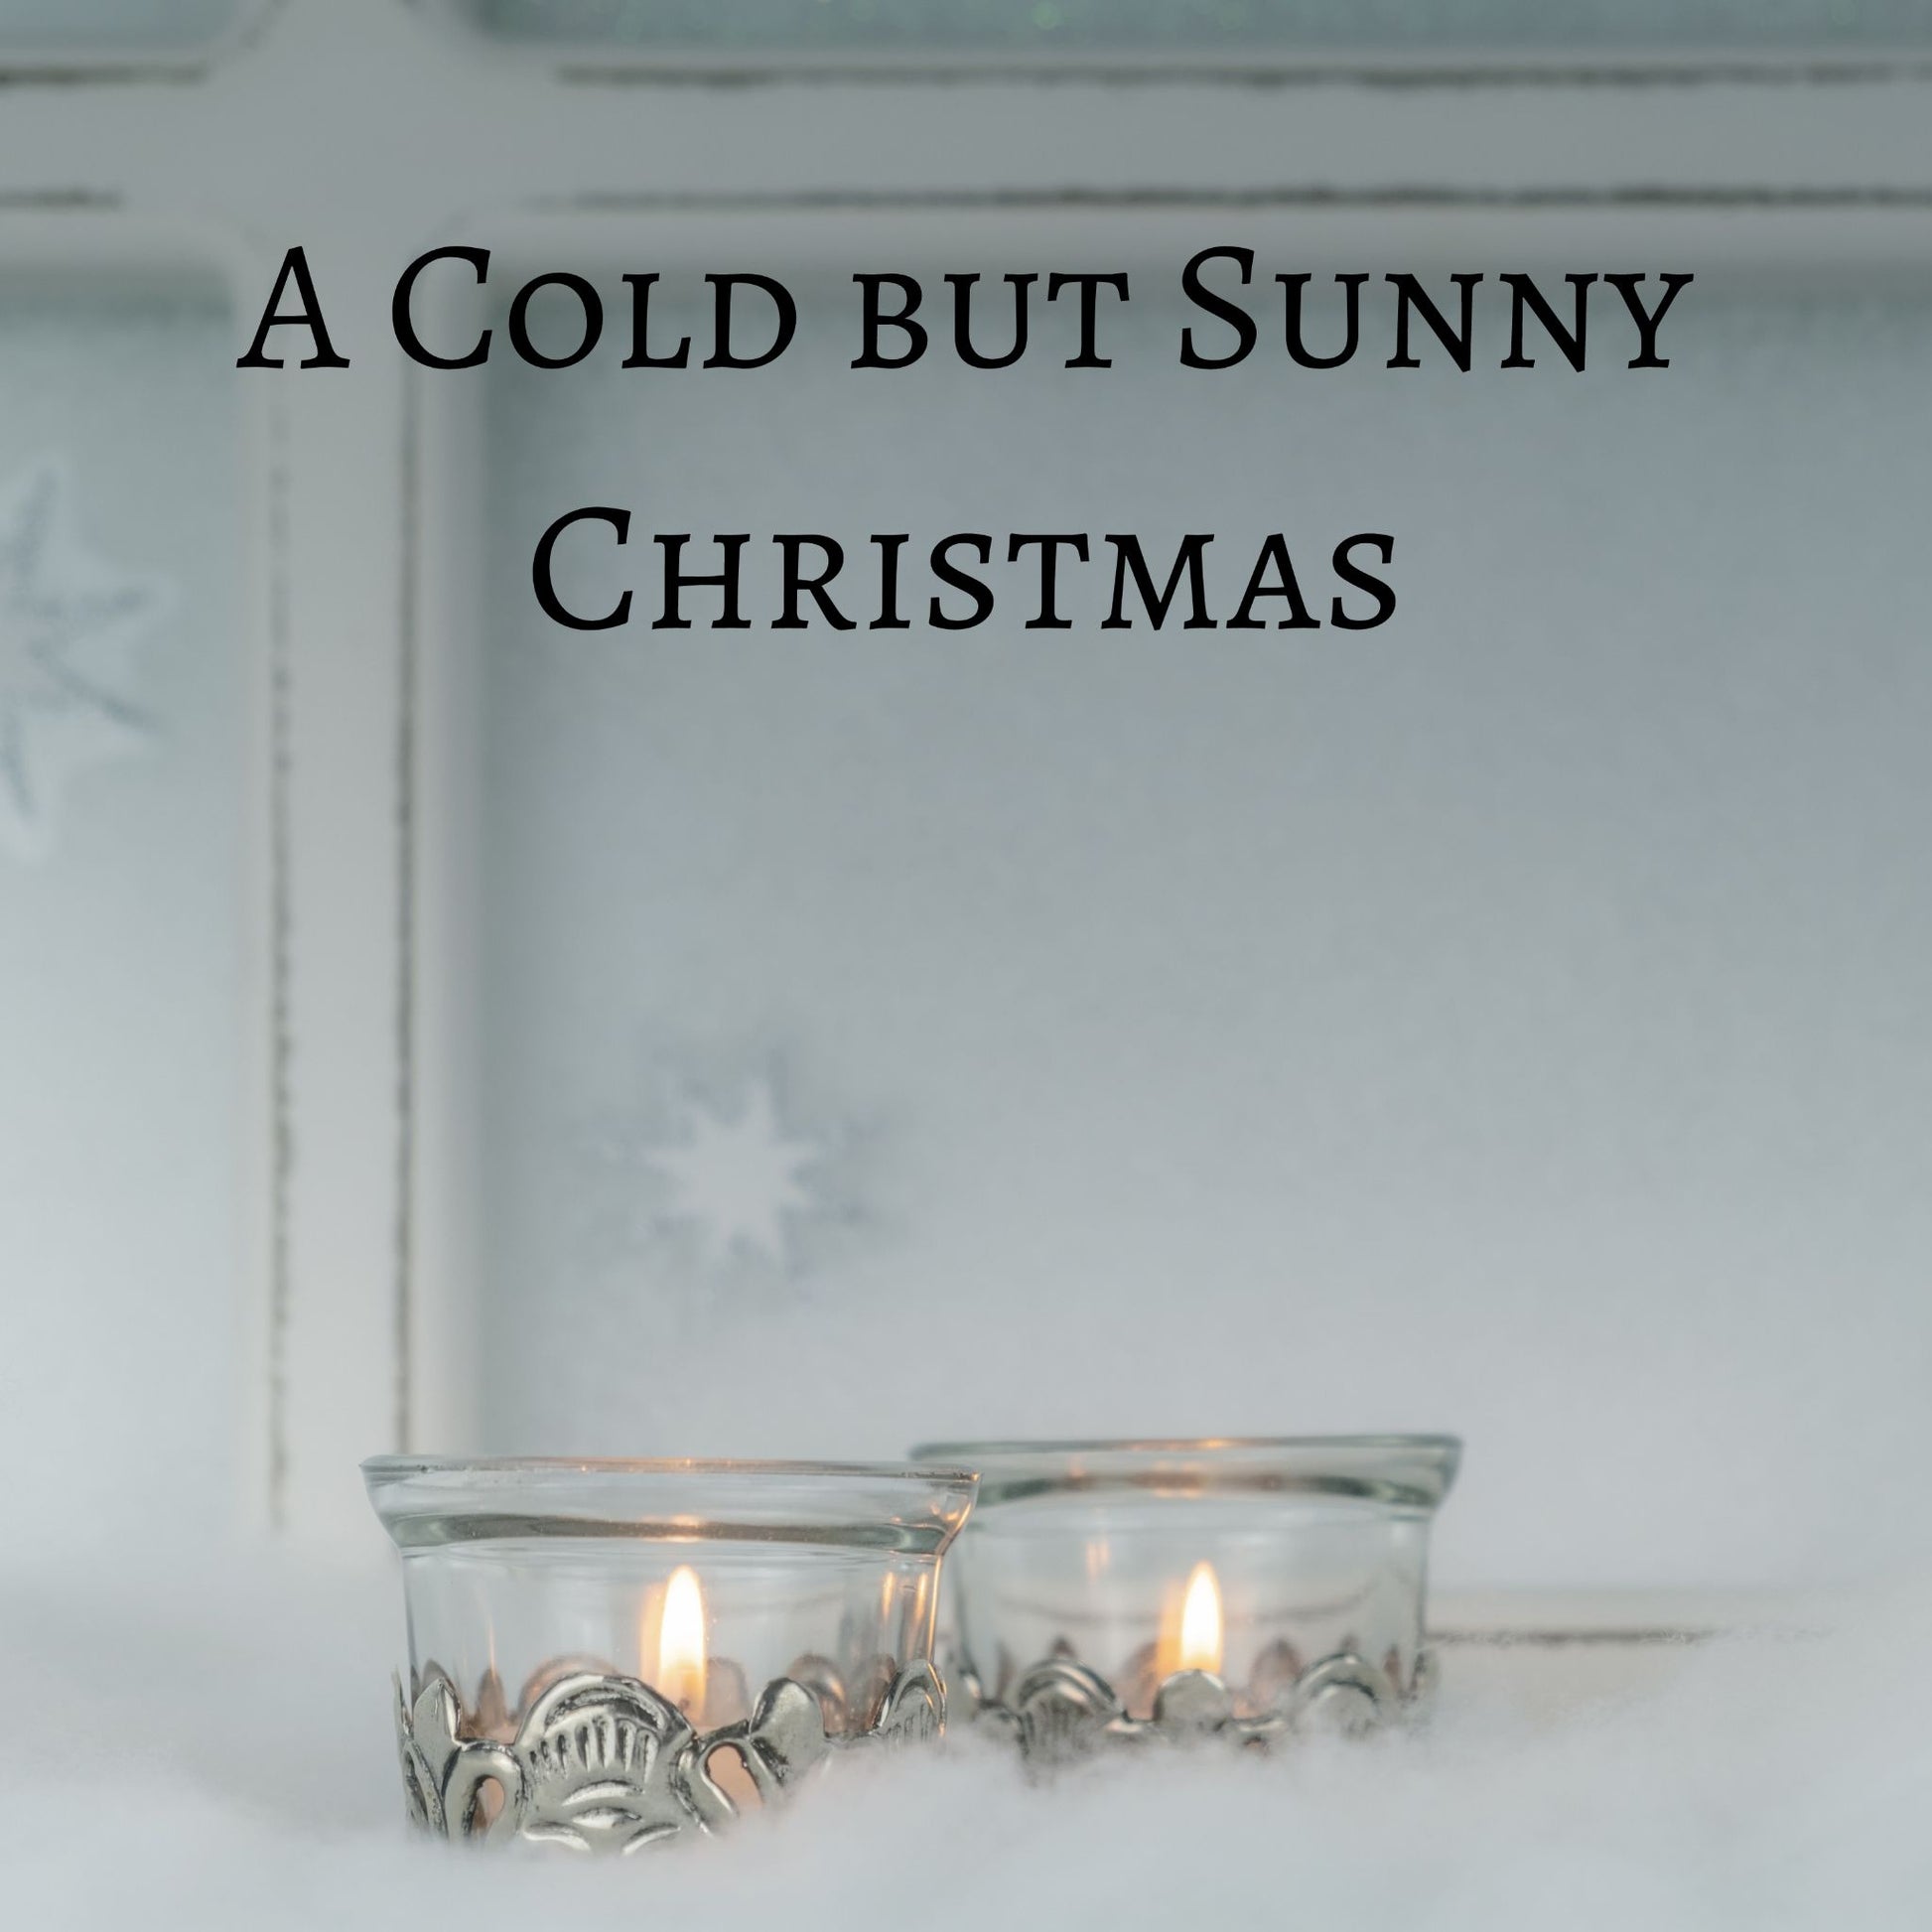 CD Cover of song A Cold but Sunny Christmas